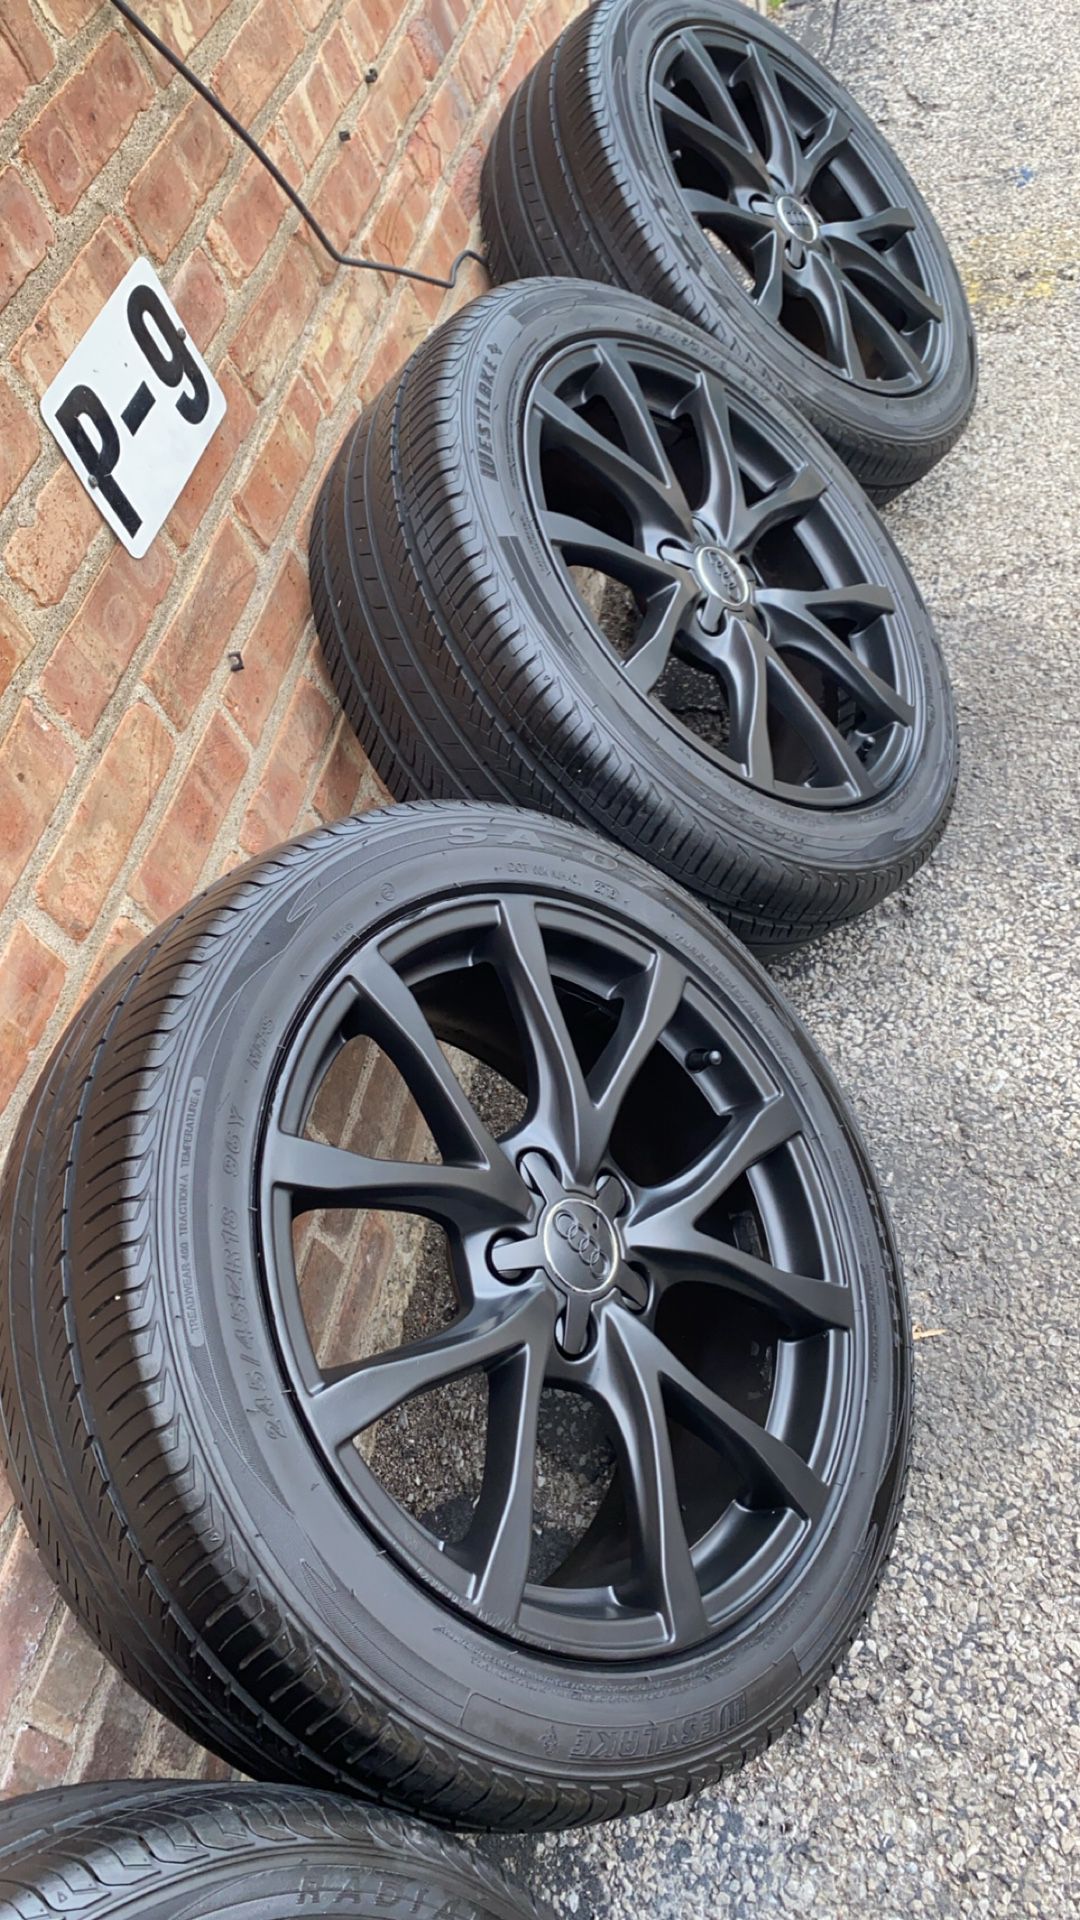 18” Audi Rims And Tires Sensors Are Included 